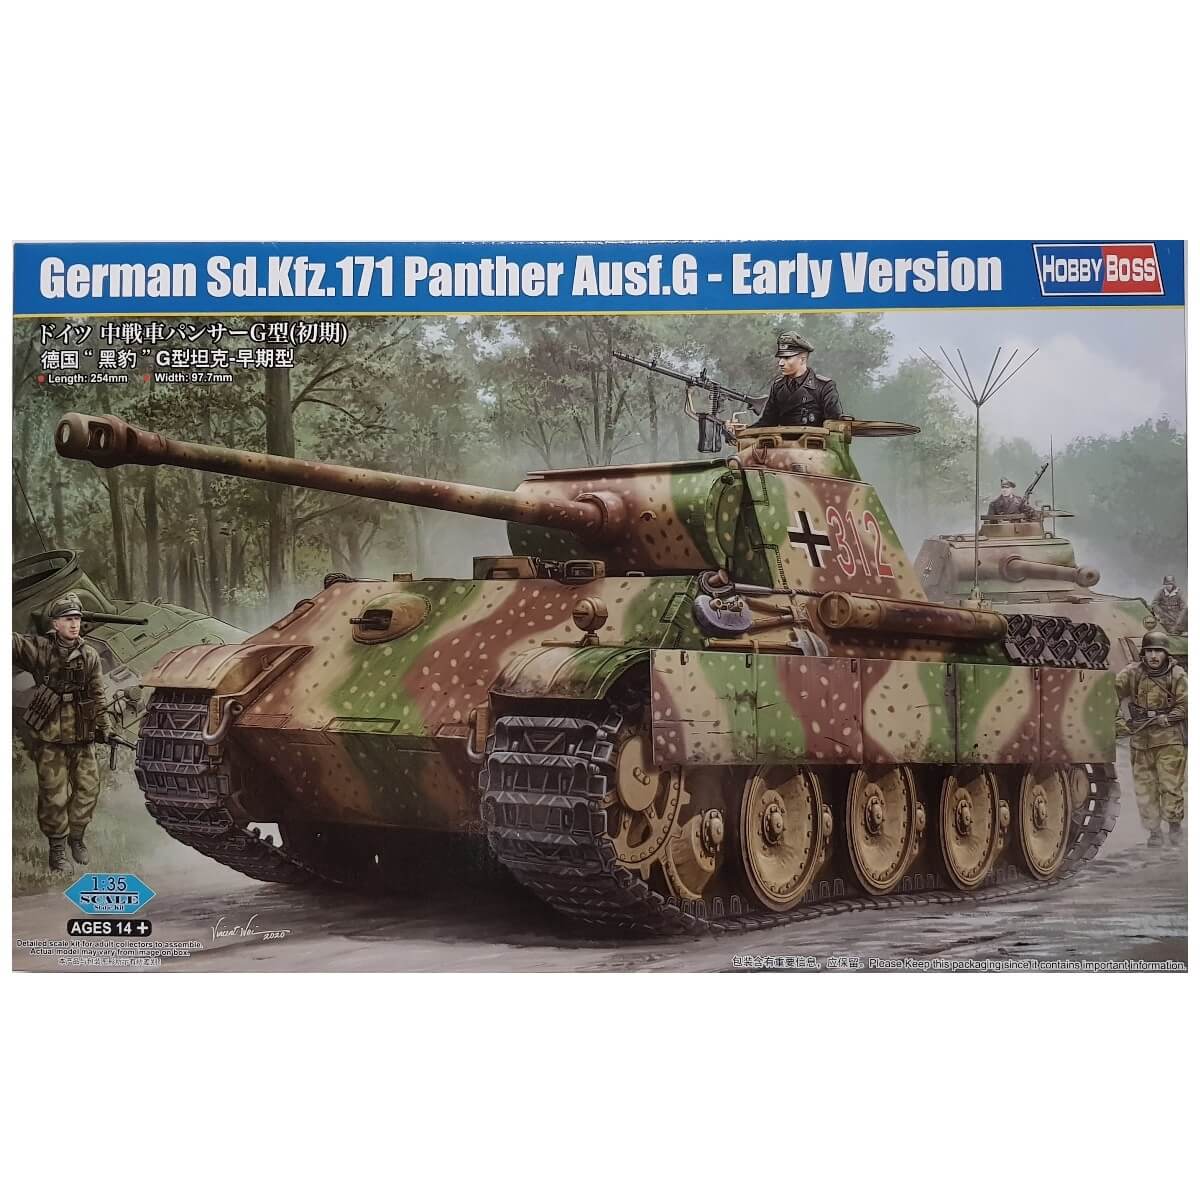 1:35 German Sd.Kfz. 171 Panther Ausf. G - Early Version - HOBBY BOSS